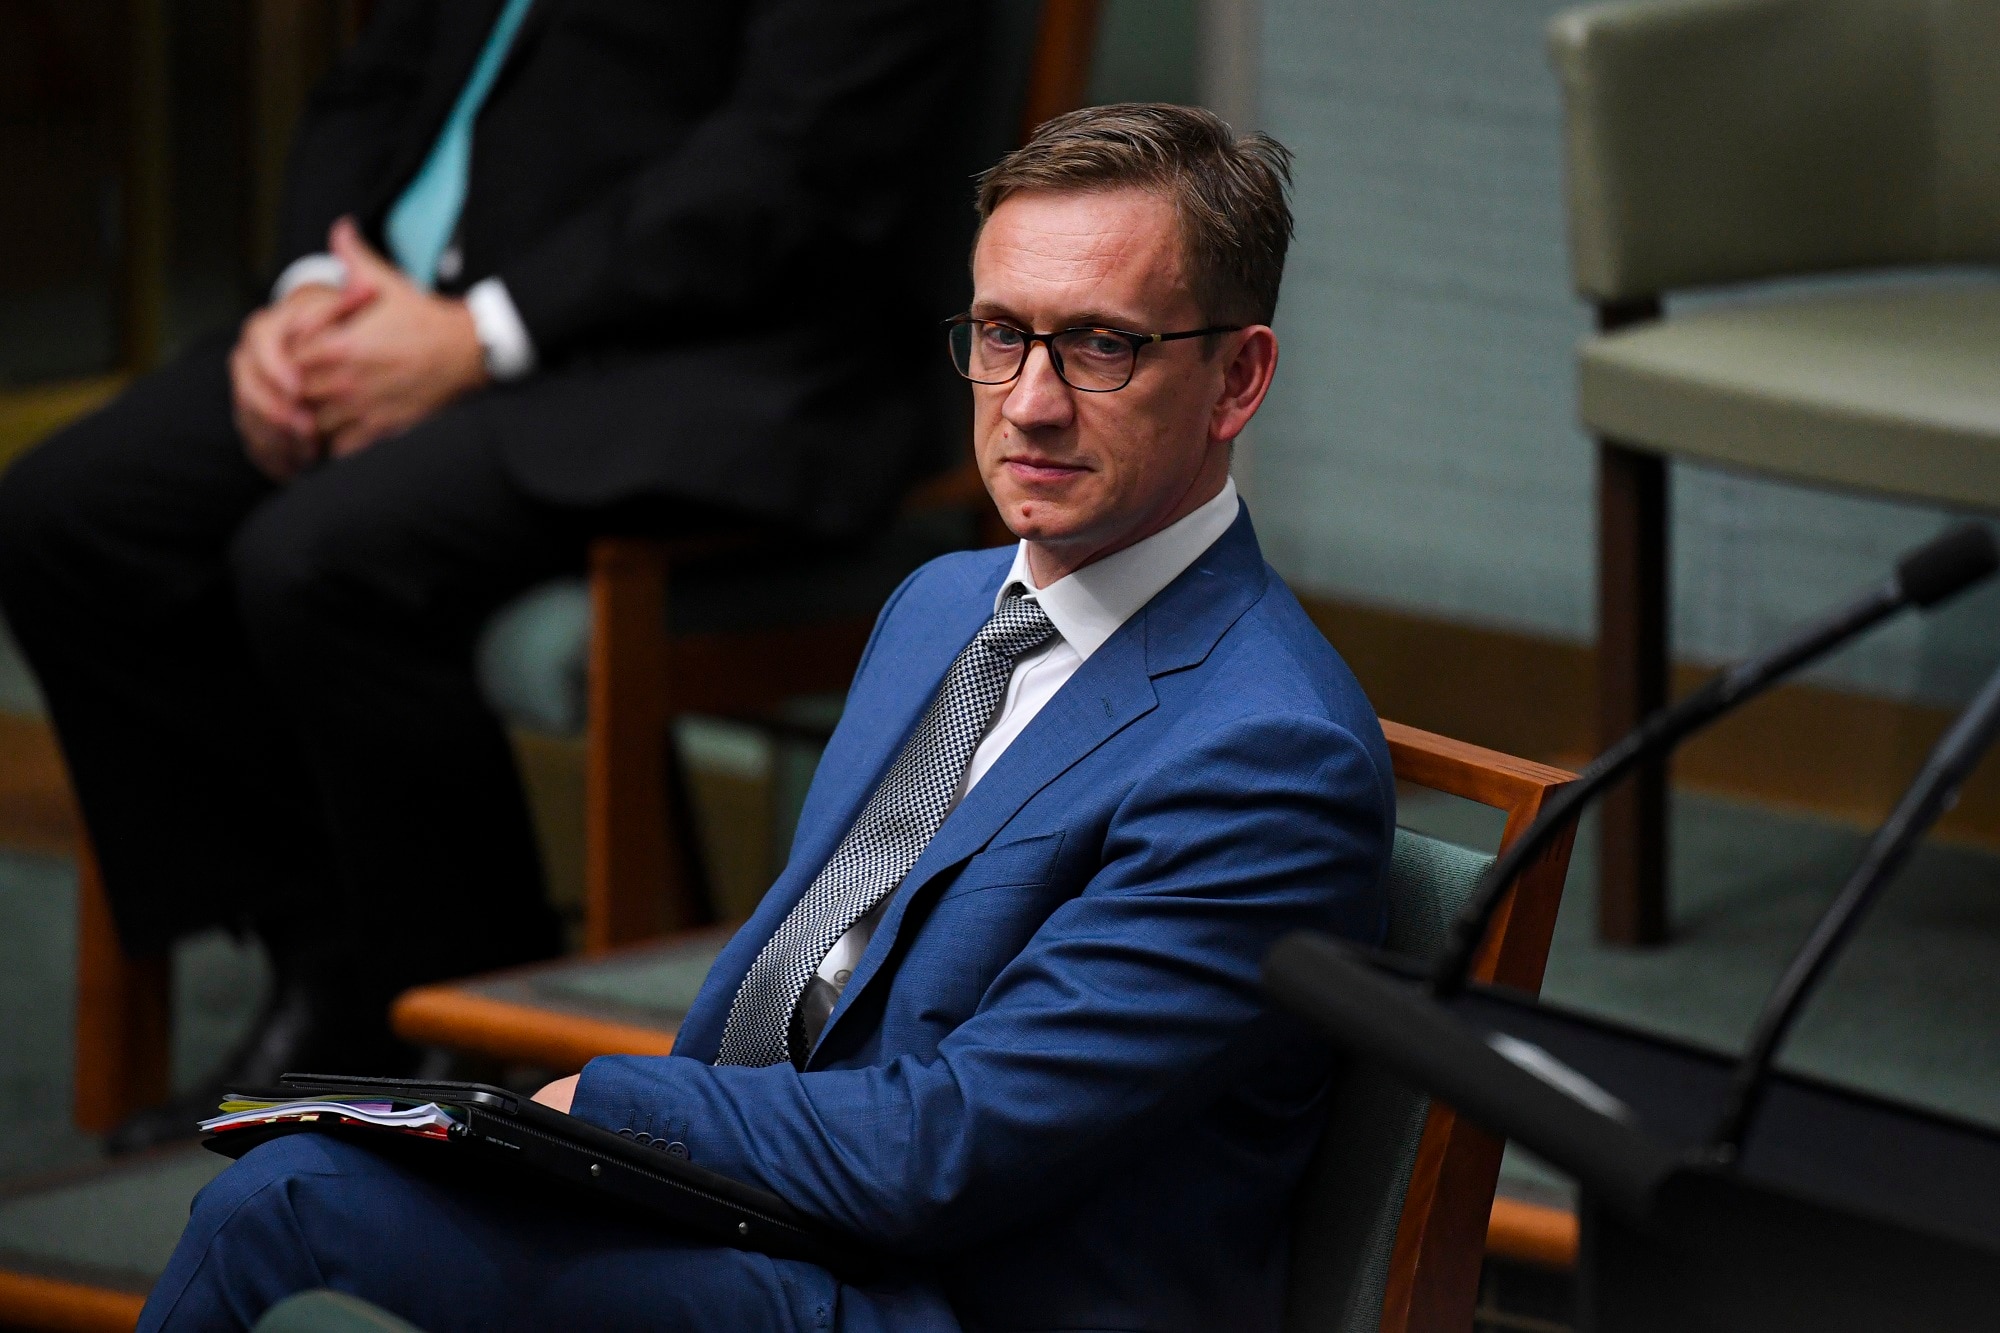 Labor MP Julian Hill has written a letter to federal Health Minister Greg Hunt requesting the urgent implementation of a campaign to counter misinformation.